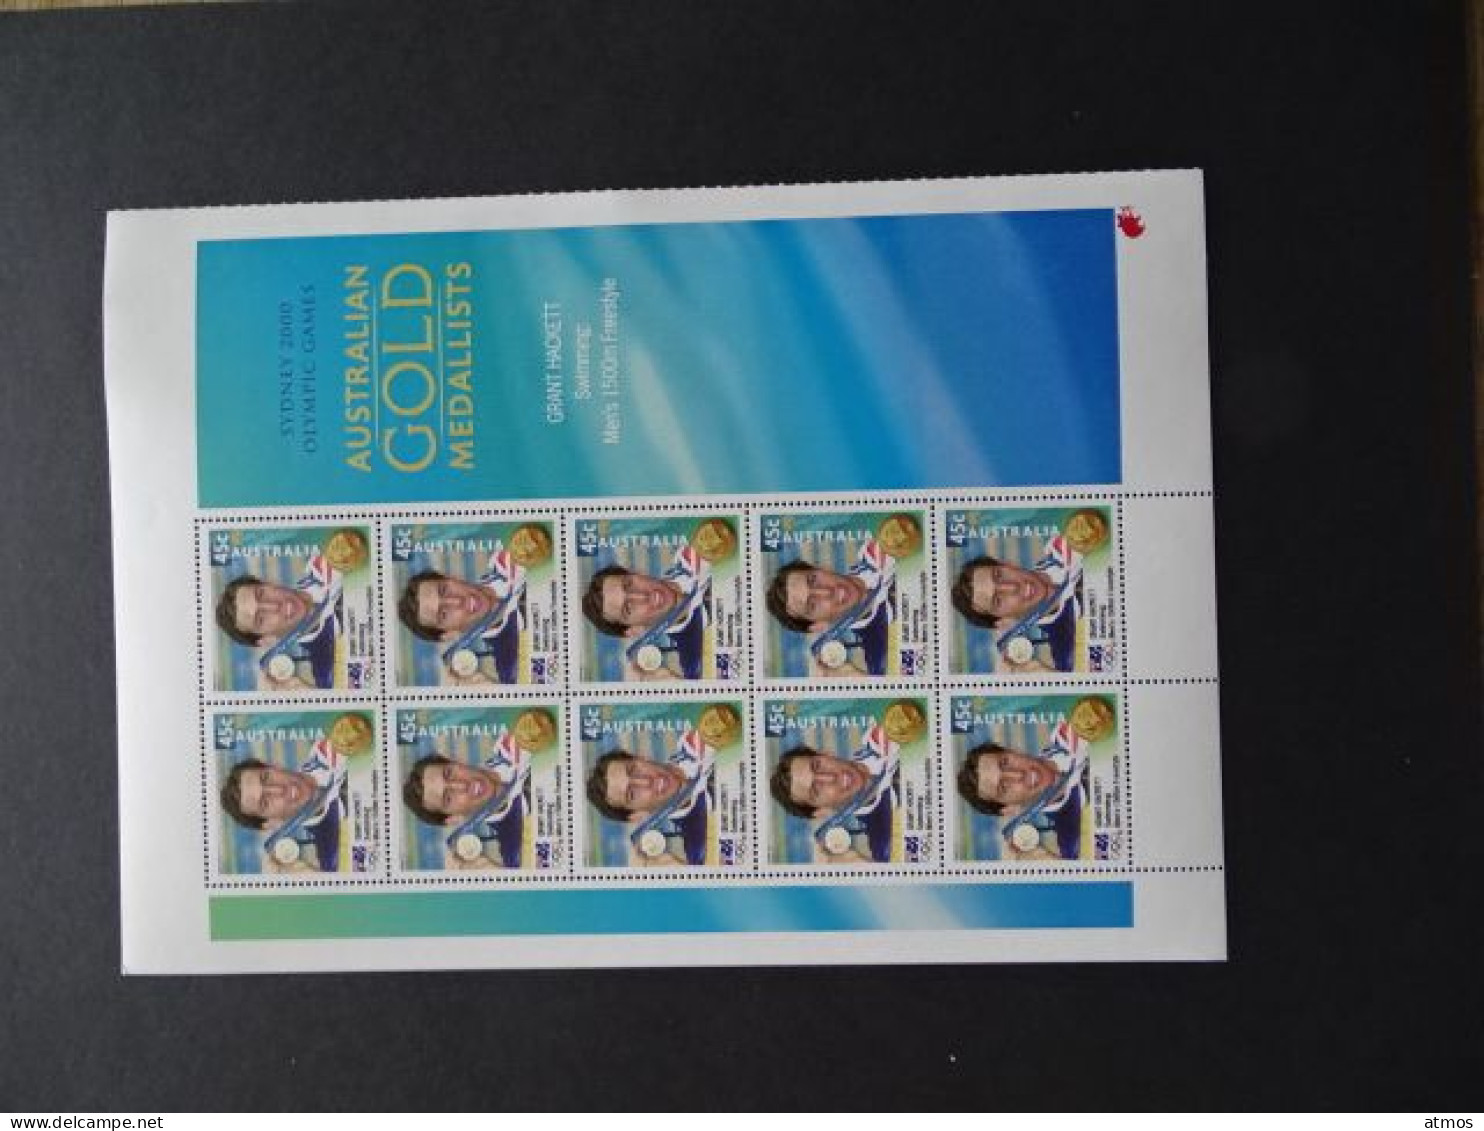 Australia MNH Michel Nr 1981 Sheet Of 10 From 2000 QLD - Mint Stamps